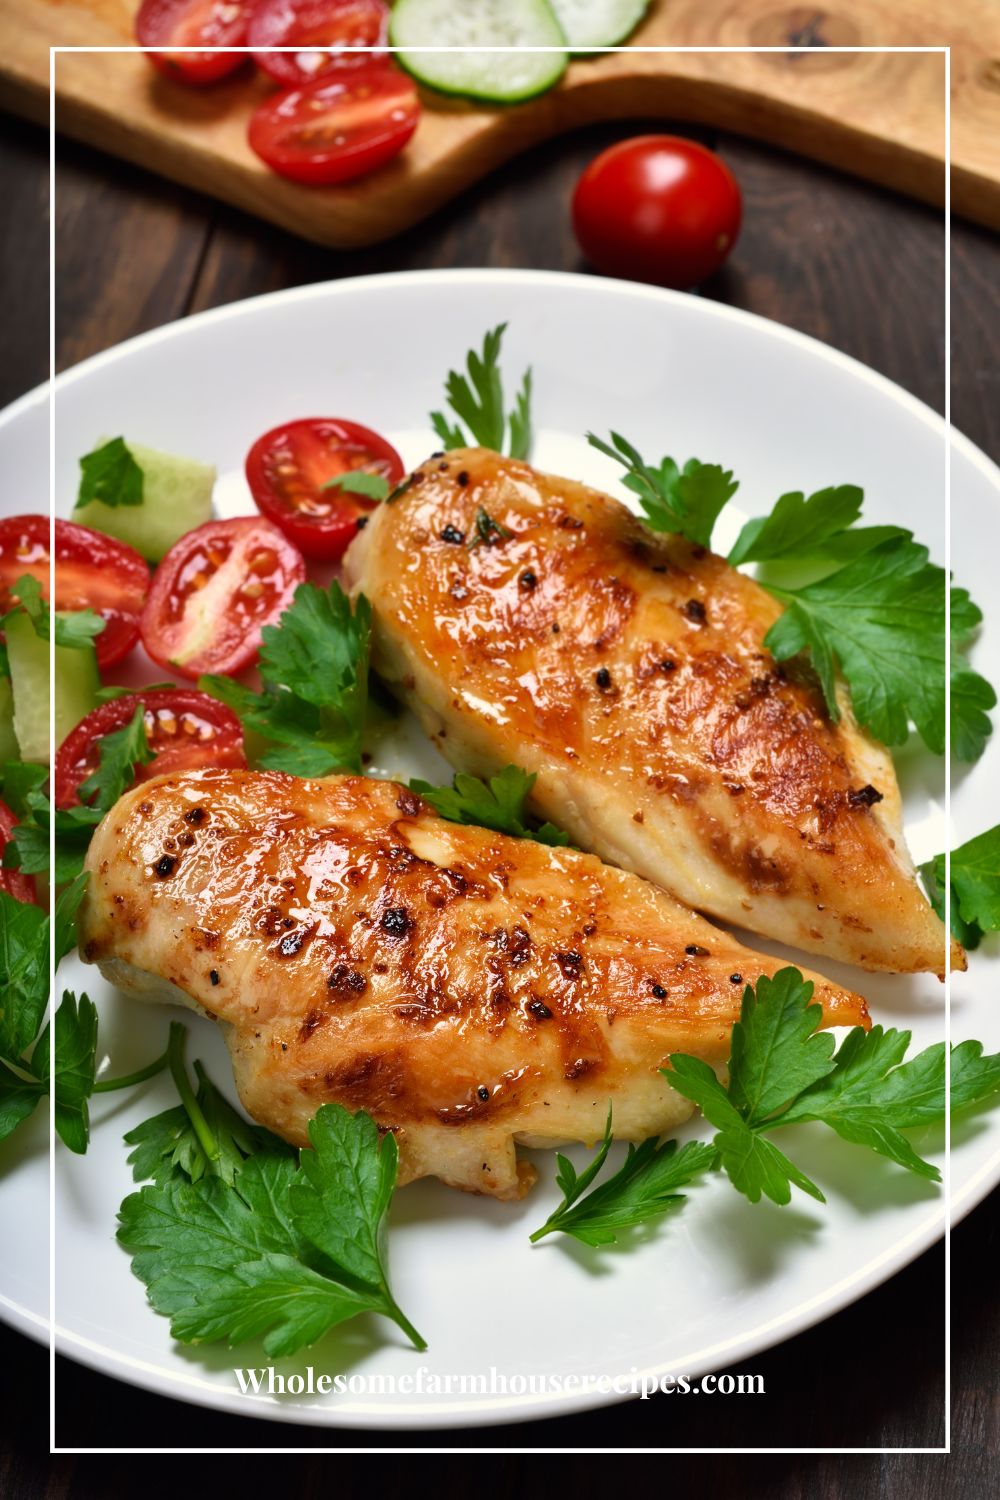 melt-in-your-mouth tender chicken